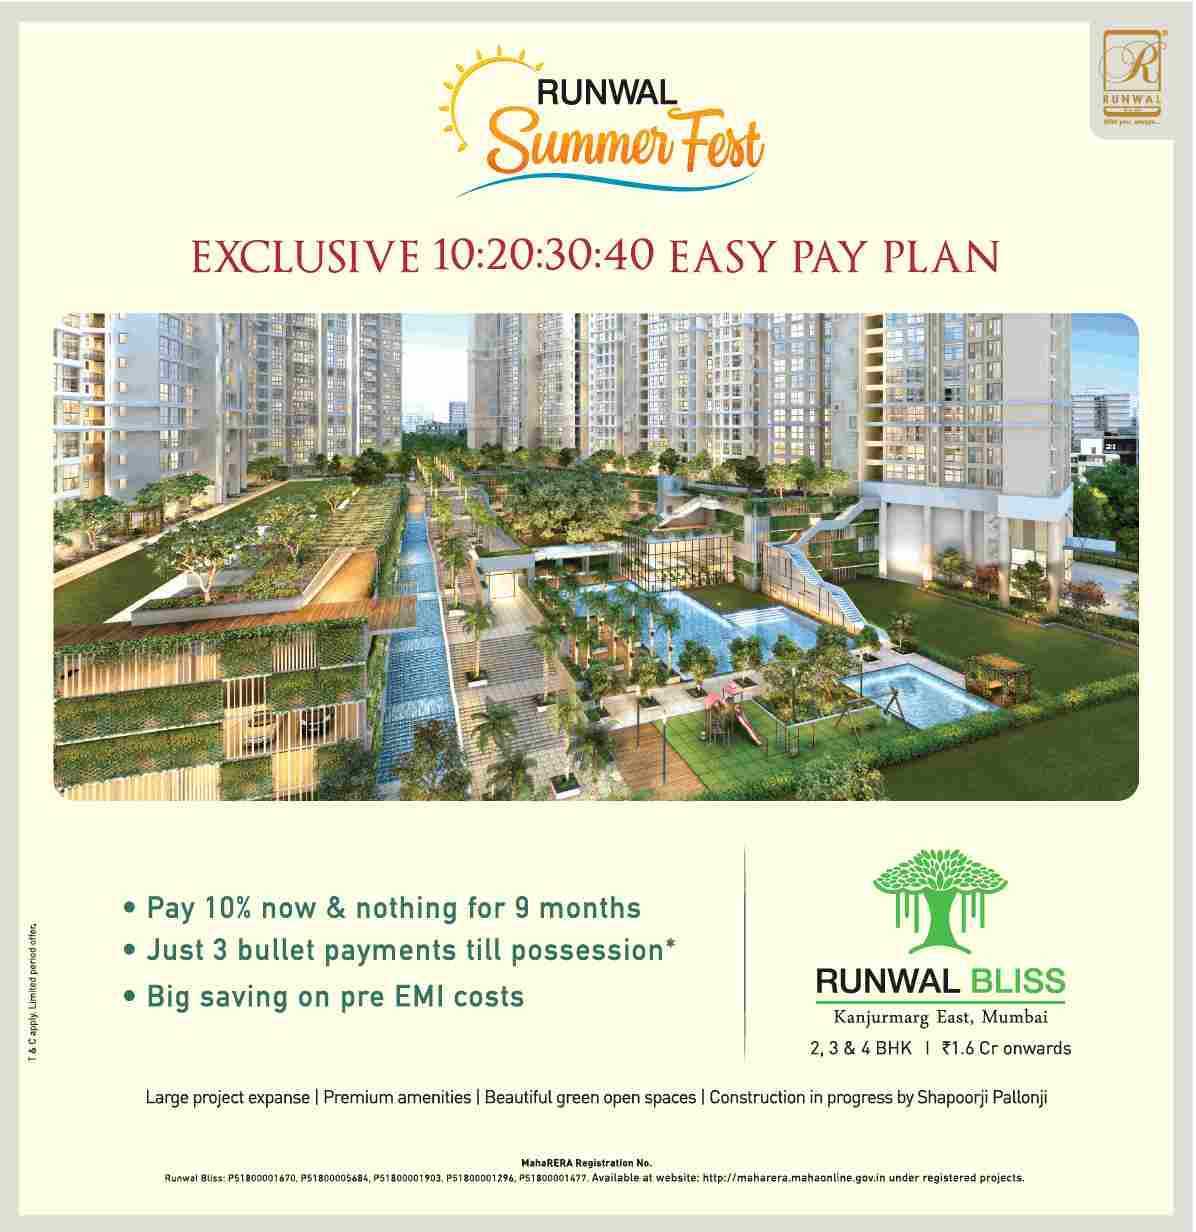 Avail the exclusive 10:20:30:40 easy pay plan at Runwal Bliss in Mumbai